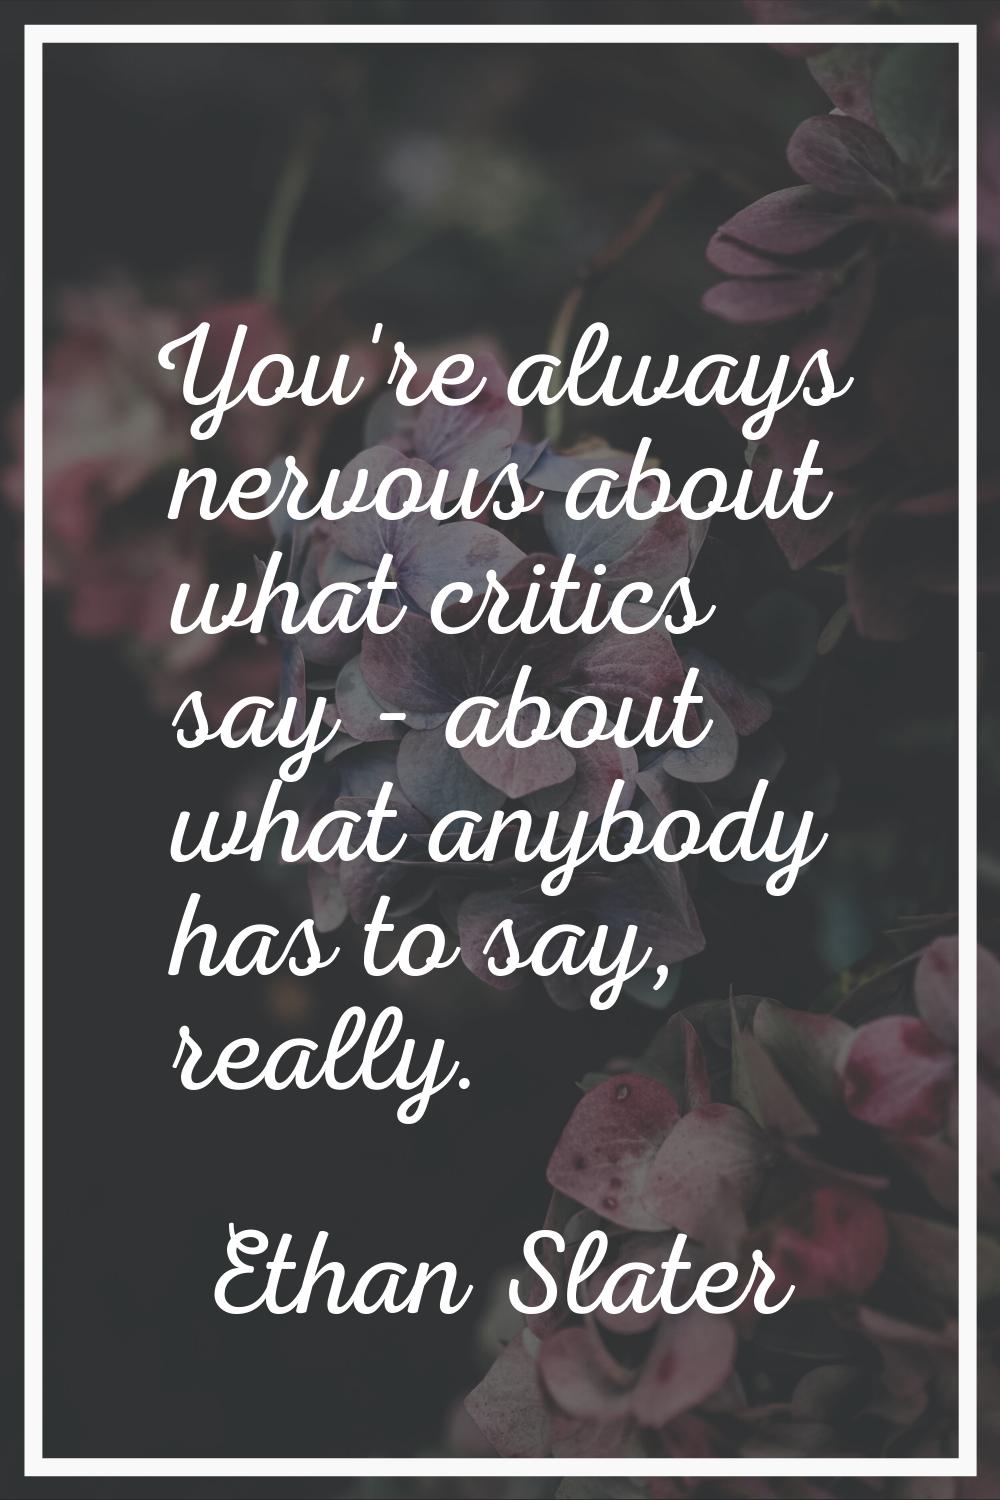 You're always nervous about what critics say - about what anybody has to say, really.